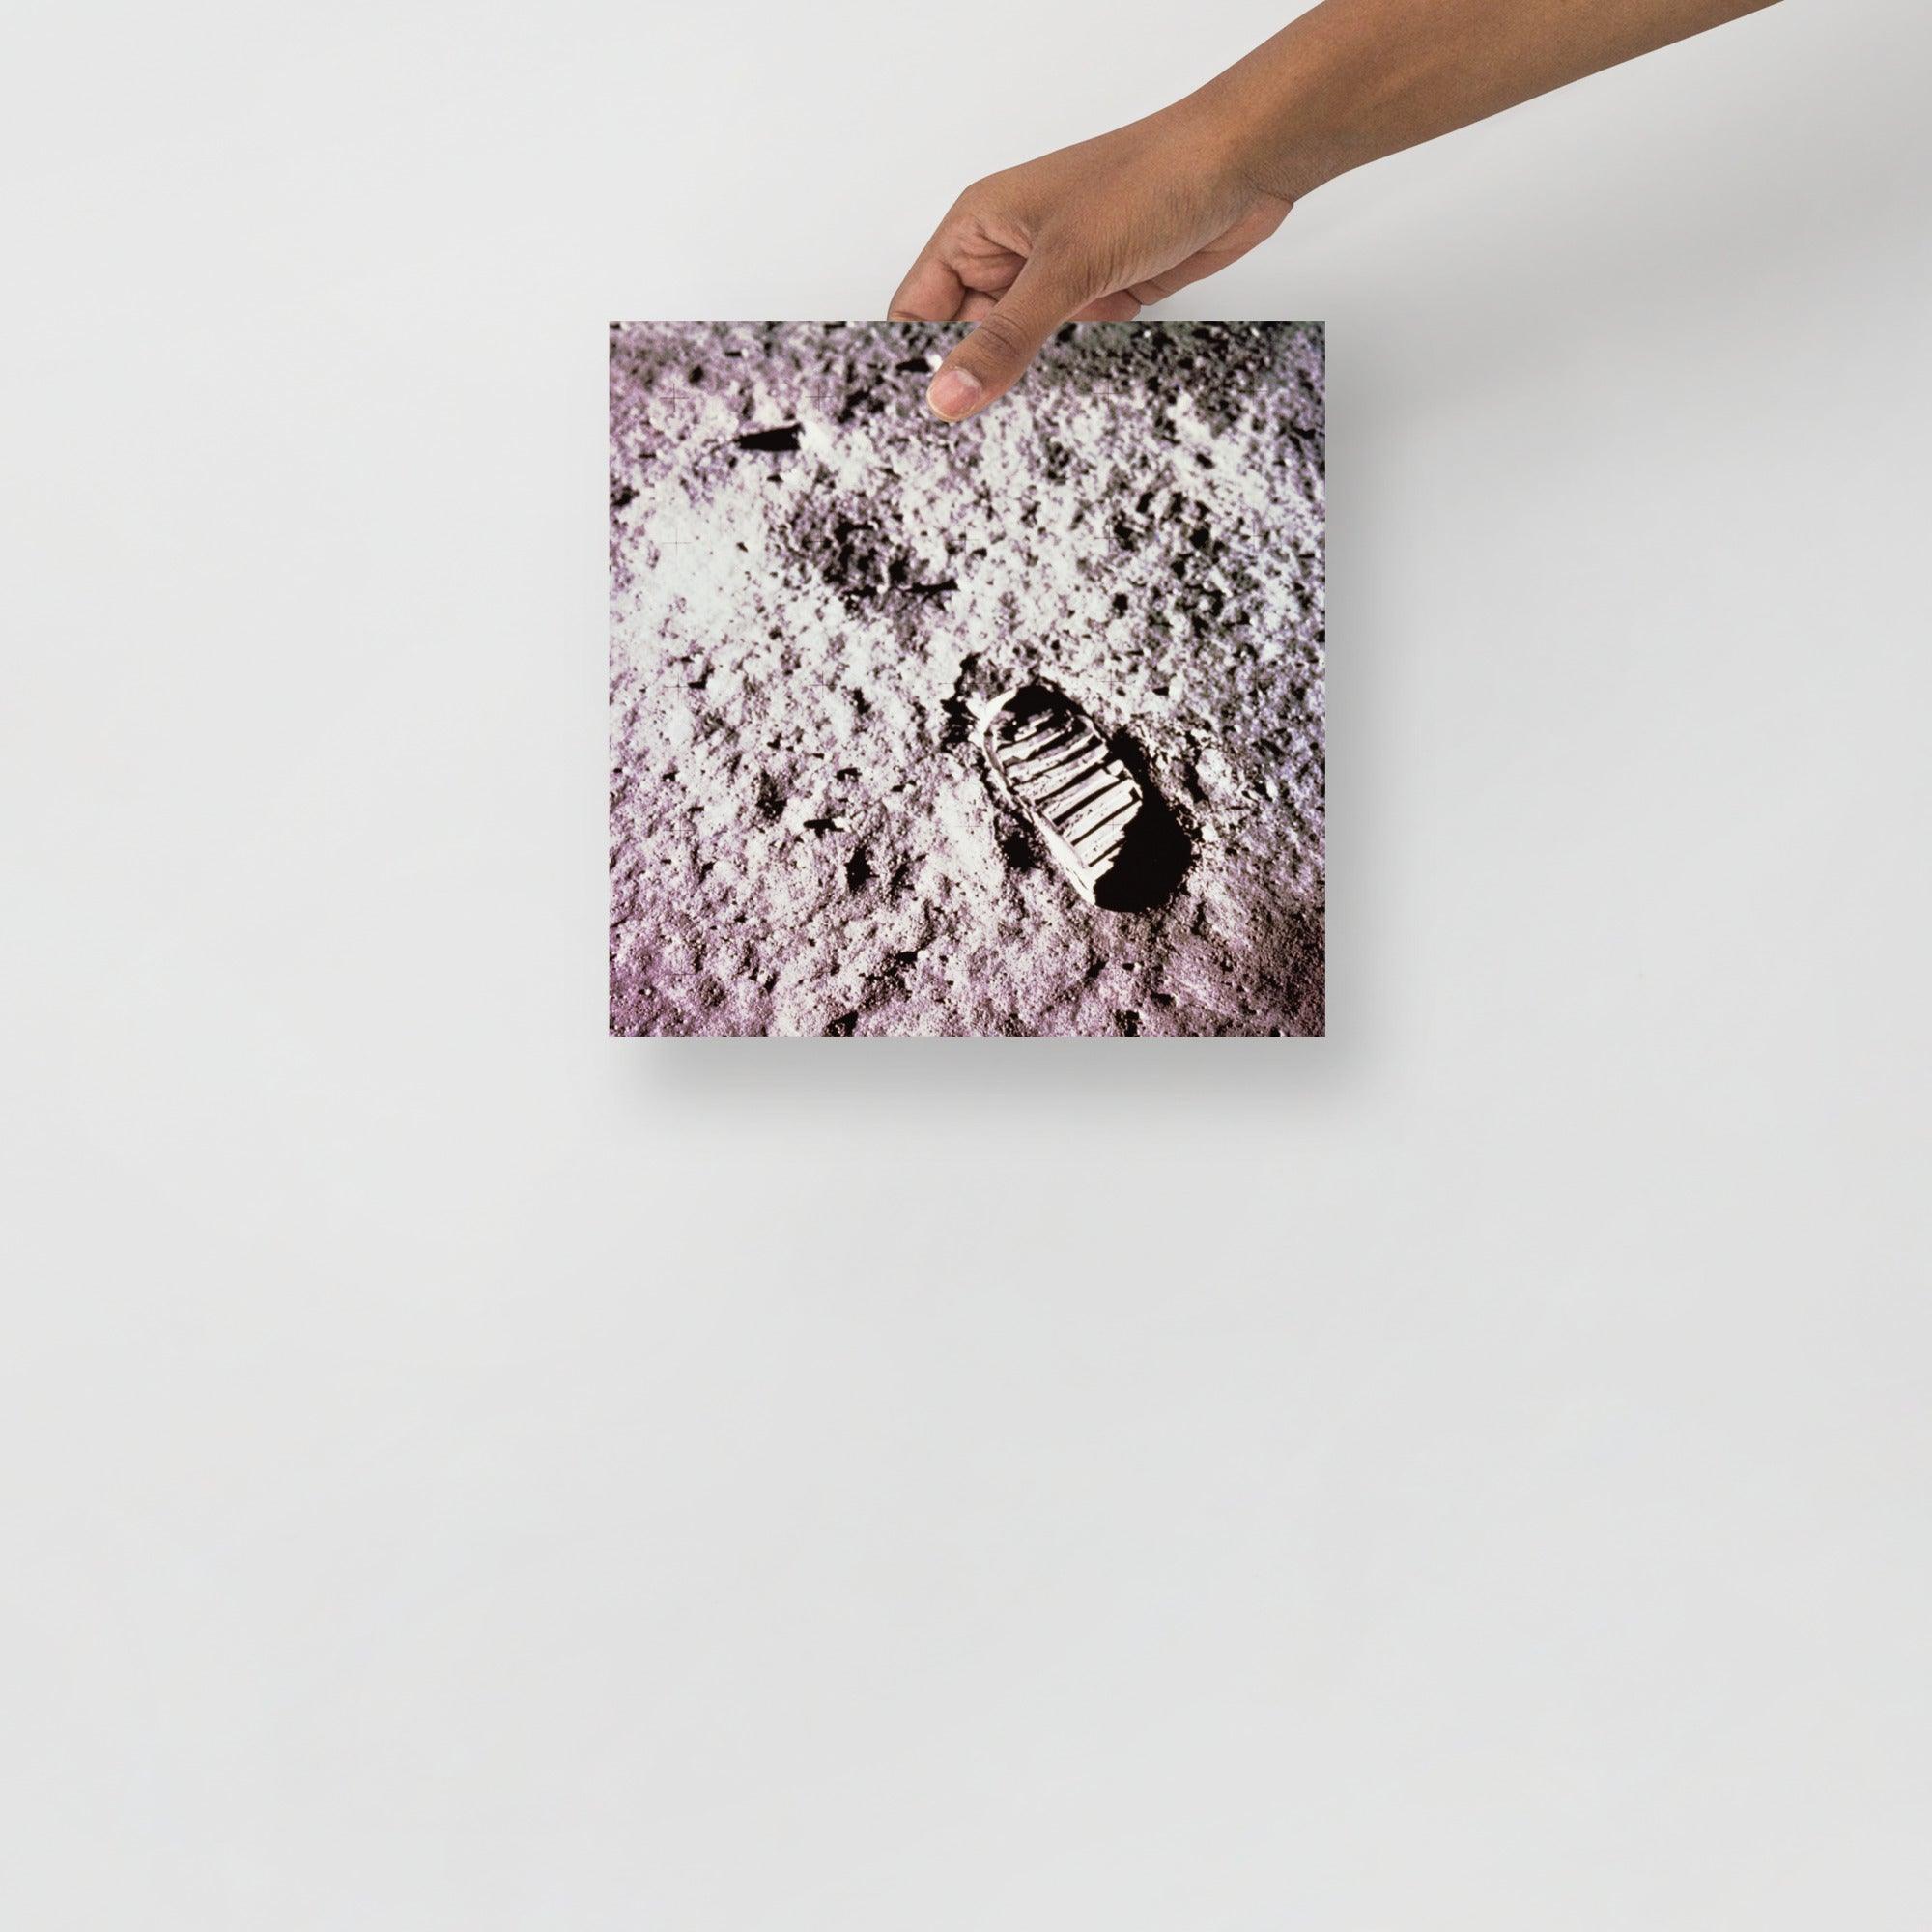 A Footprint on the Moon Apollo 11 poster on a plain backdrop in size 10x10”.